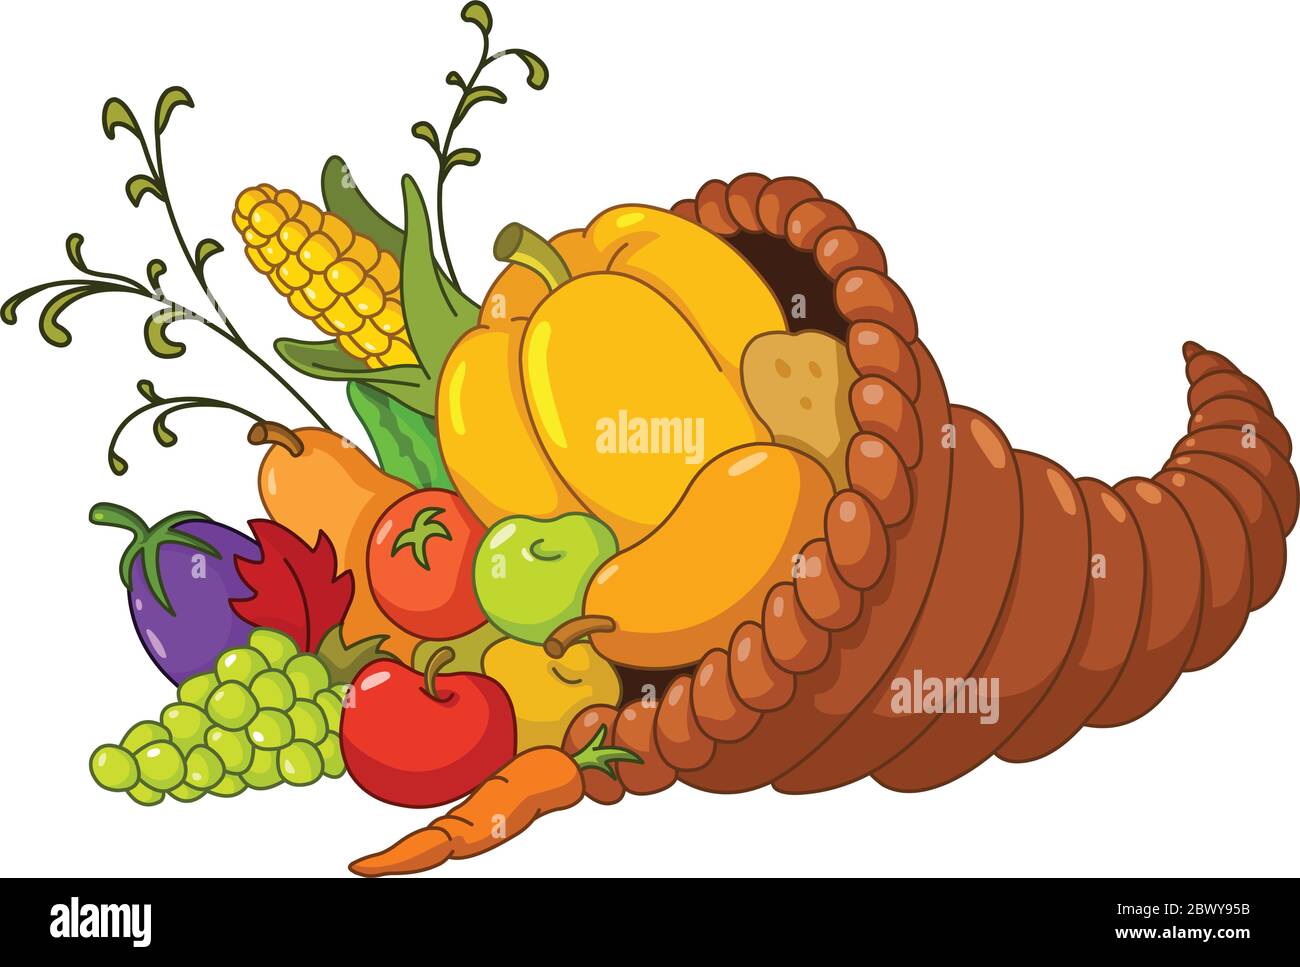 Horn of plenty. Cornucopia with autumn fruits and vegetables Stock Vector